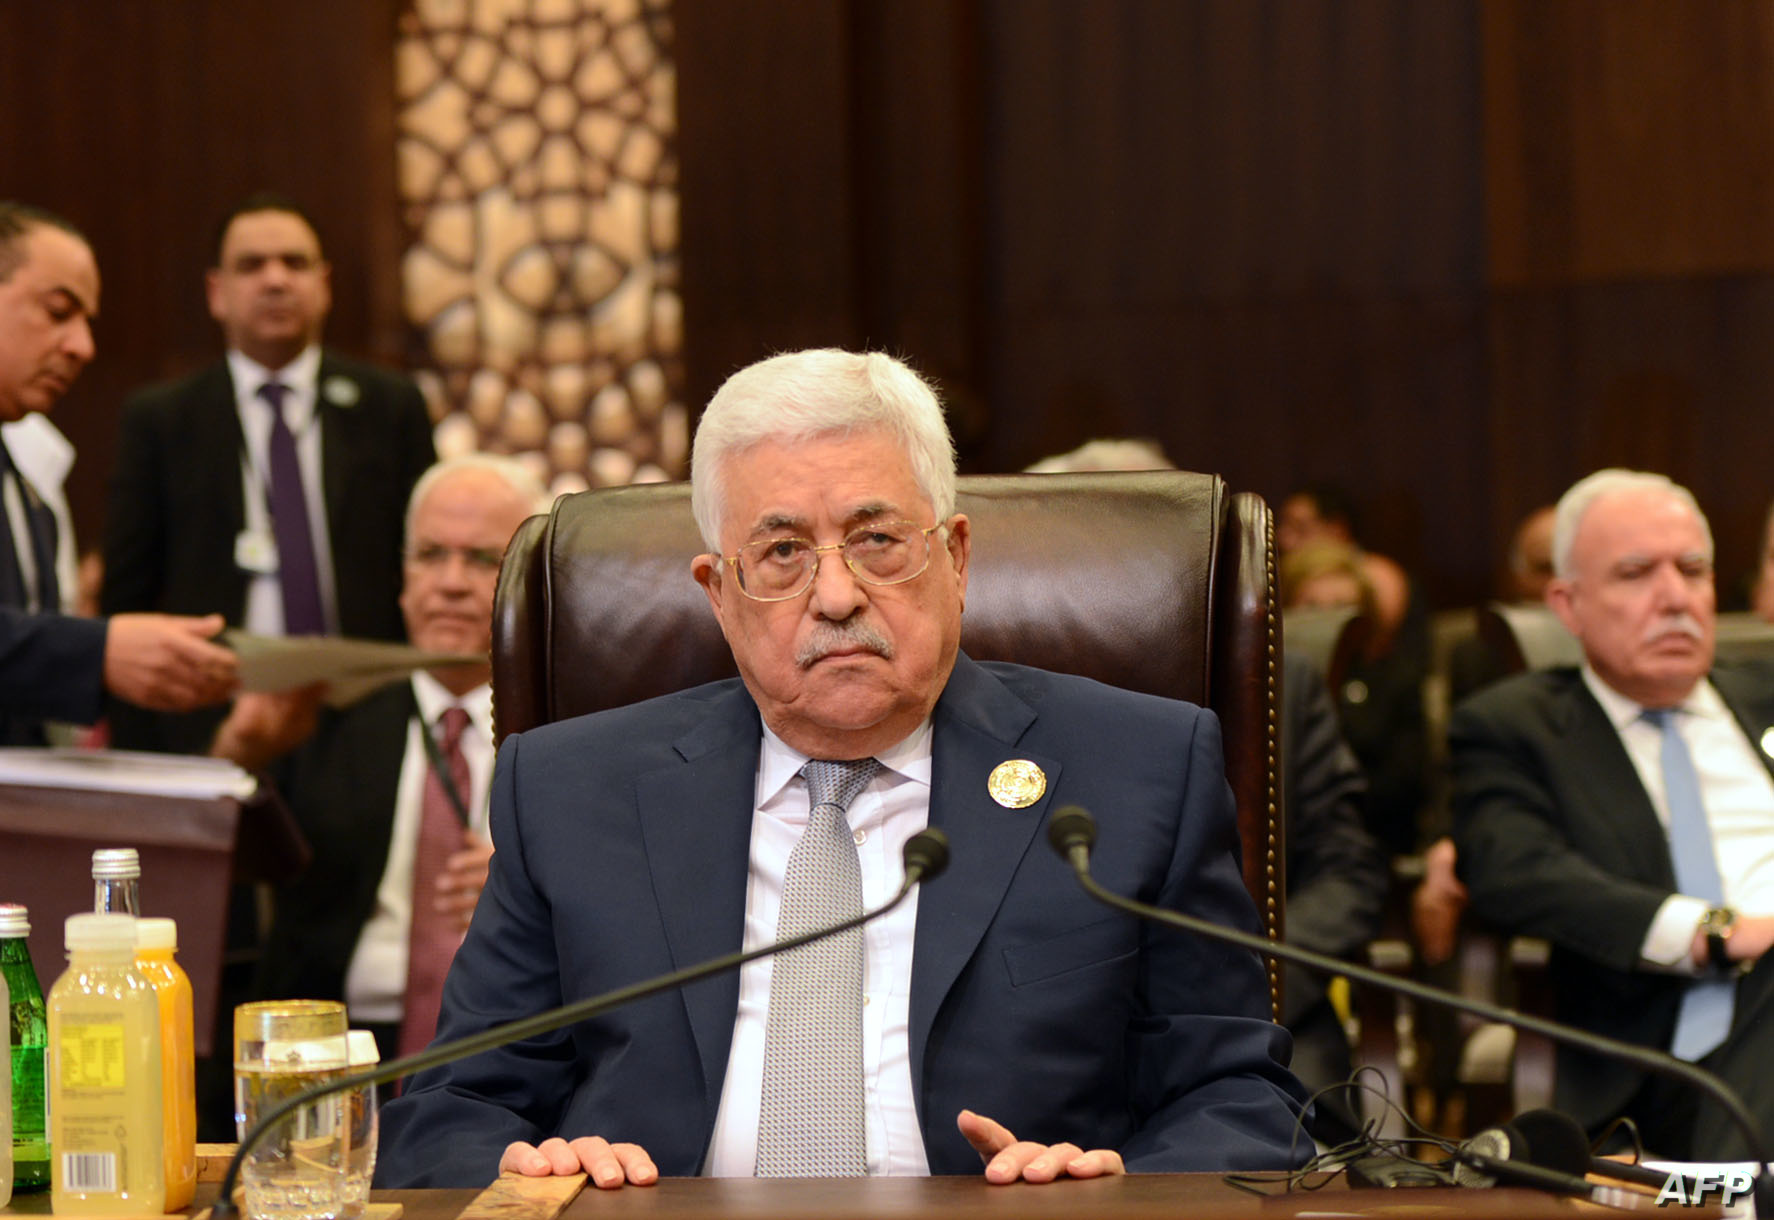 A handout picture provided by the Palestinian Authority's press office (PPO) on on March 29, 2017 shows Palestinian leader Mahmud Abbas attending talks of the Arab League summit in the Jordanian Dead Sea resort of Sweimeh. Arab leaders are set to meet in Jordan for their annual summit with no expected breakthrough on resolving conflicts or "terrorism" in the region. / AFP PHOTO / PPO / THAER GHANAIM / === RESTRICTED TO EDITORIAL USE - MANDATORY CREDIT "AFP PHOTO / HO / PPO " - NO MARKETING NO ADVERTISING CAMPAIGNS - DISTRIBUTED AS A SERVICE TO CLIENTS ===